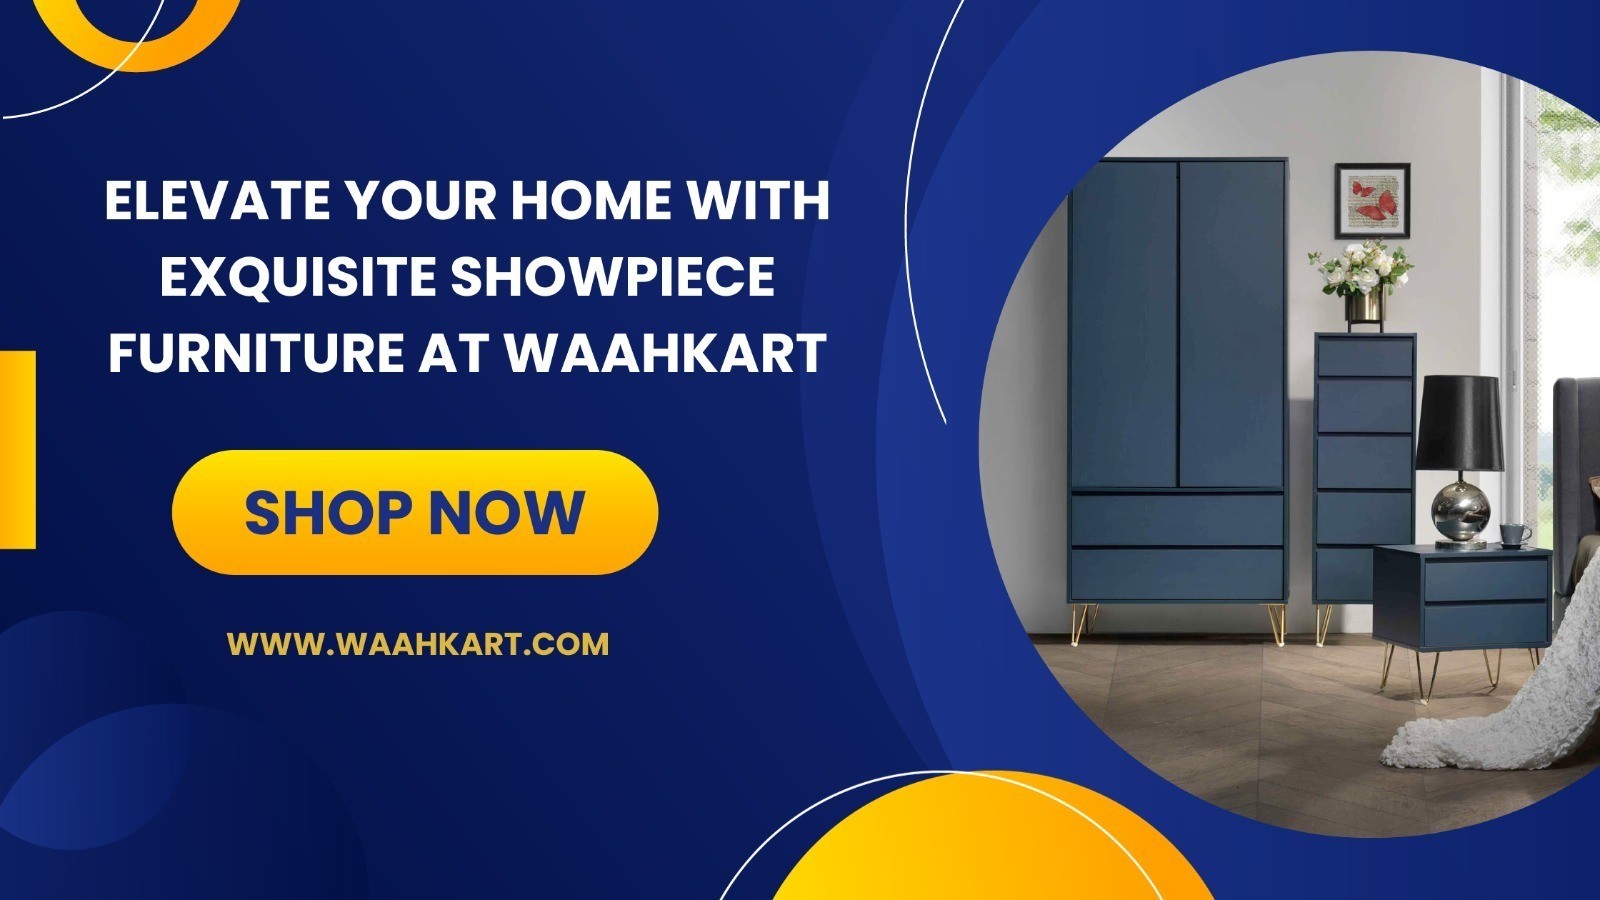 Elevate Your Home with Exquisite Showpiece Furniture at Waahkart